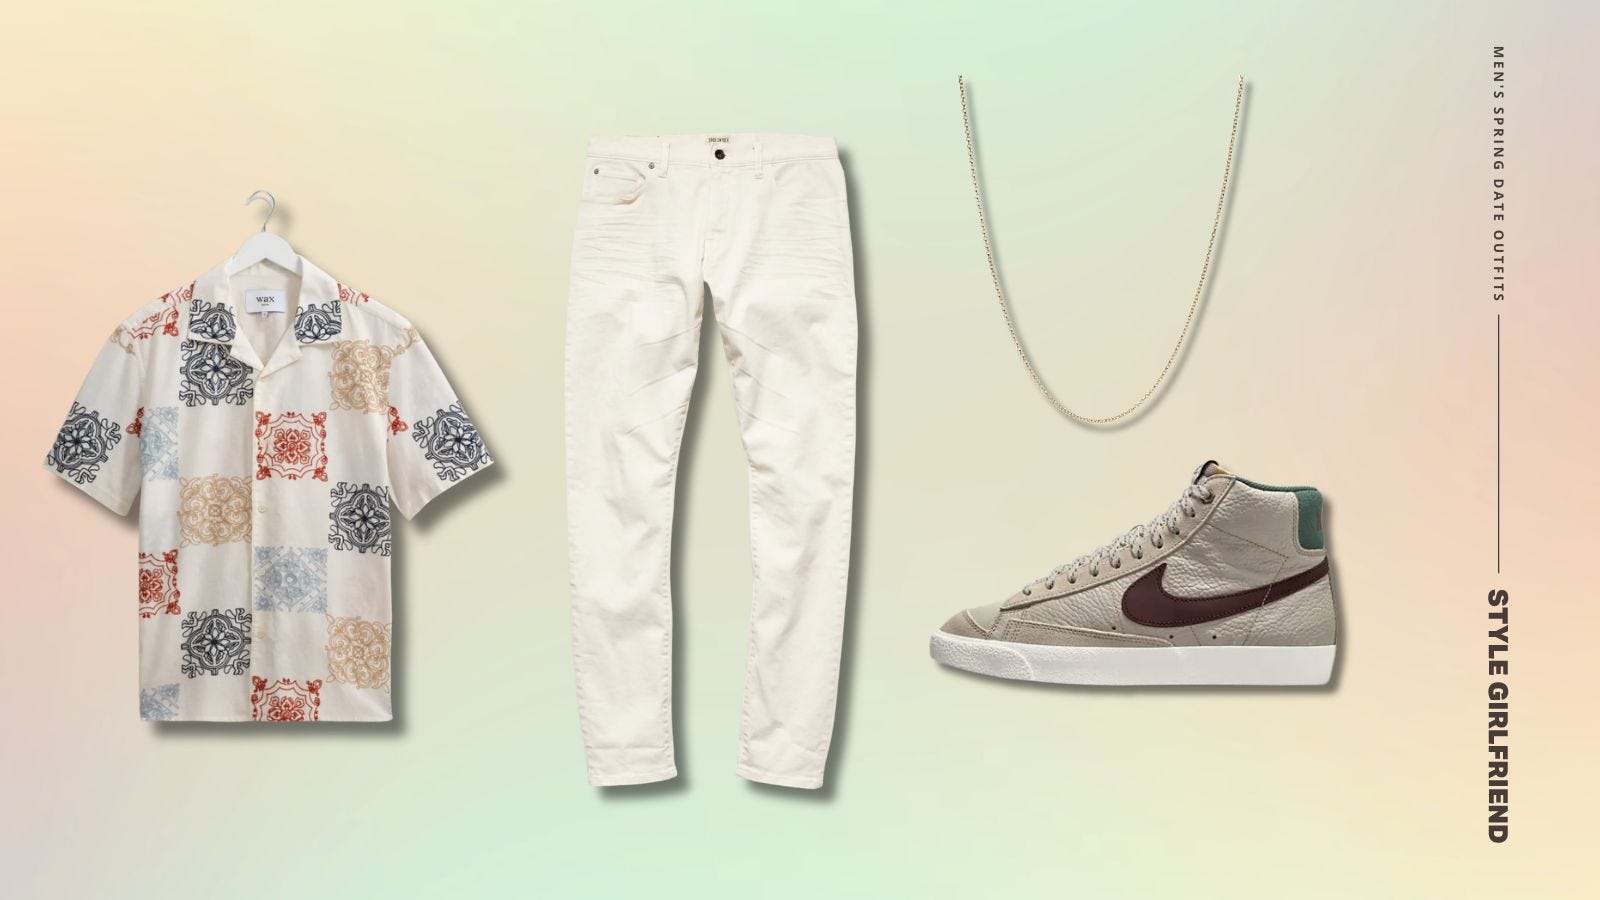 men's outfit featuring a short-sleeve patterned shirt, off-white jeans, a chain necklace, and Nike mid sneakers